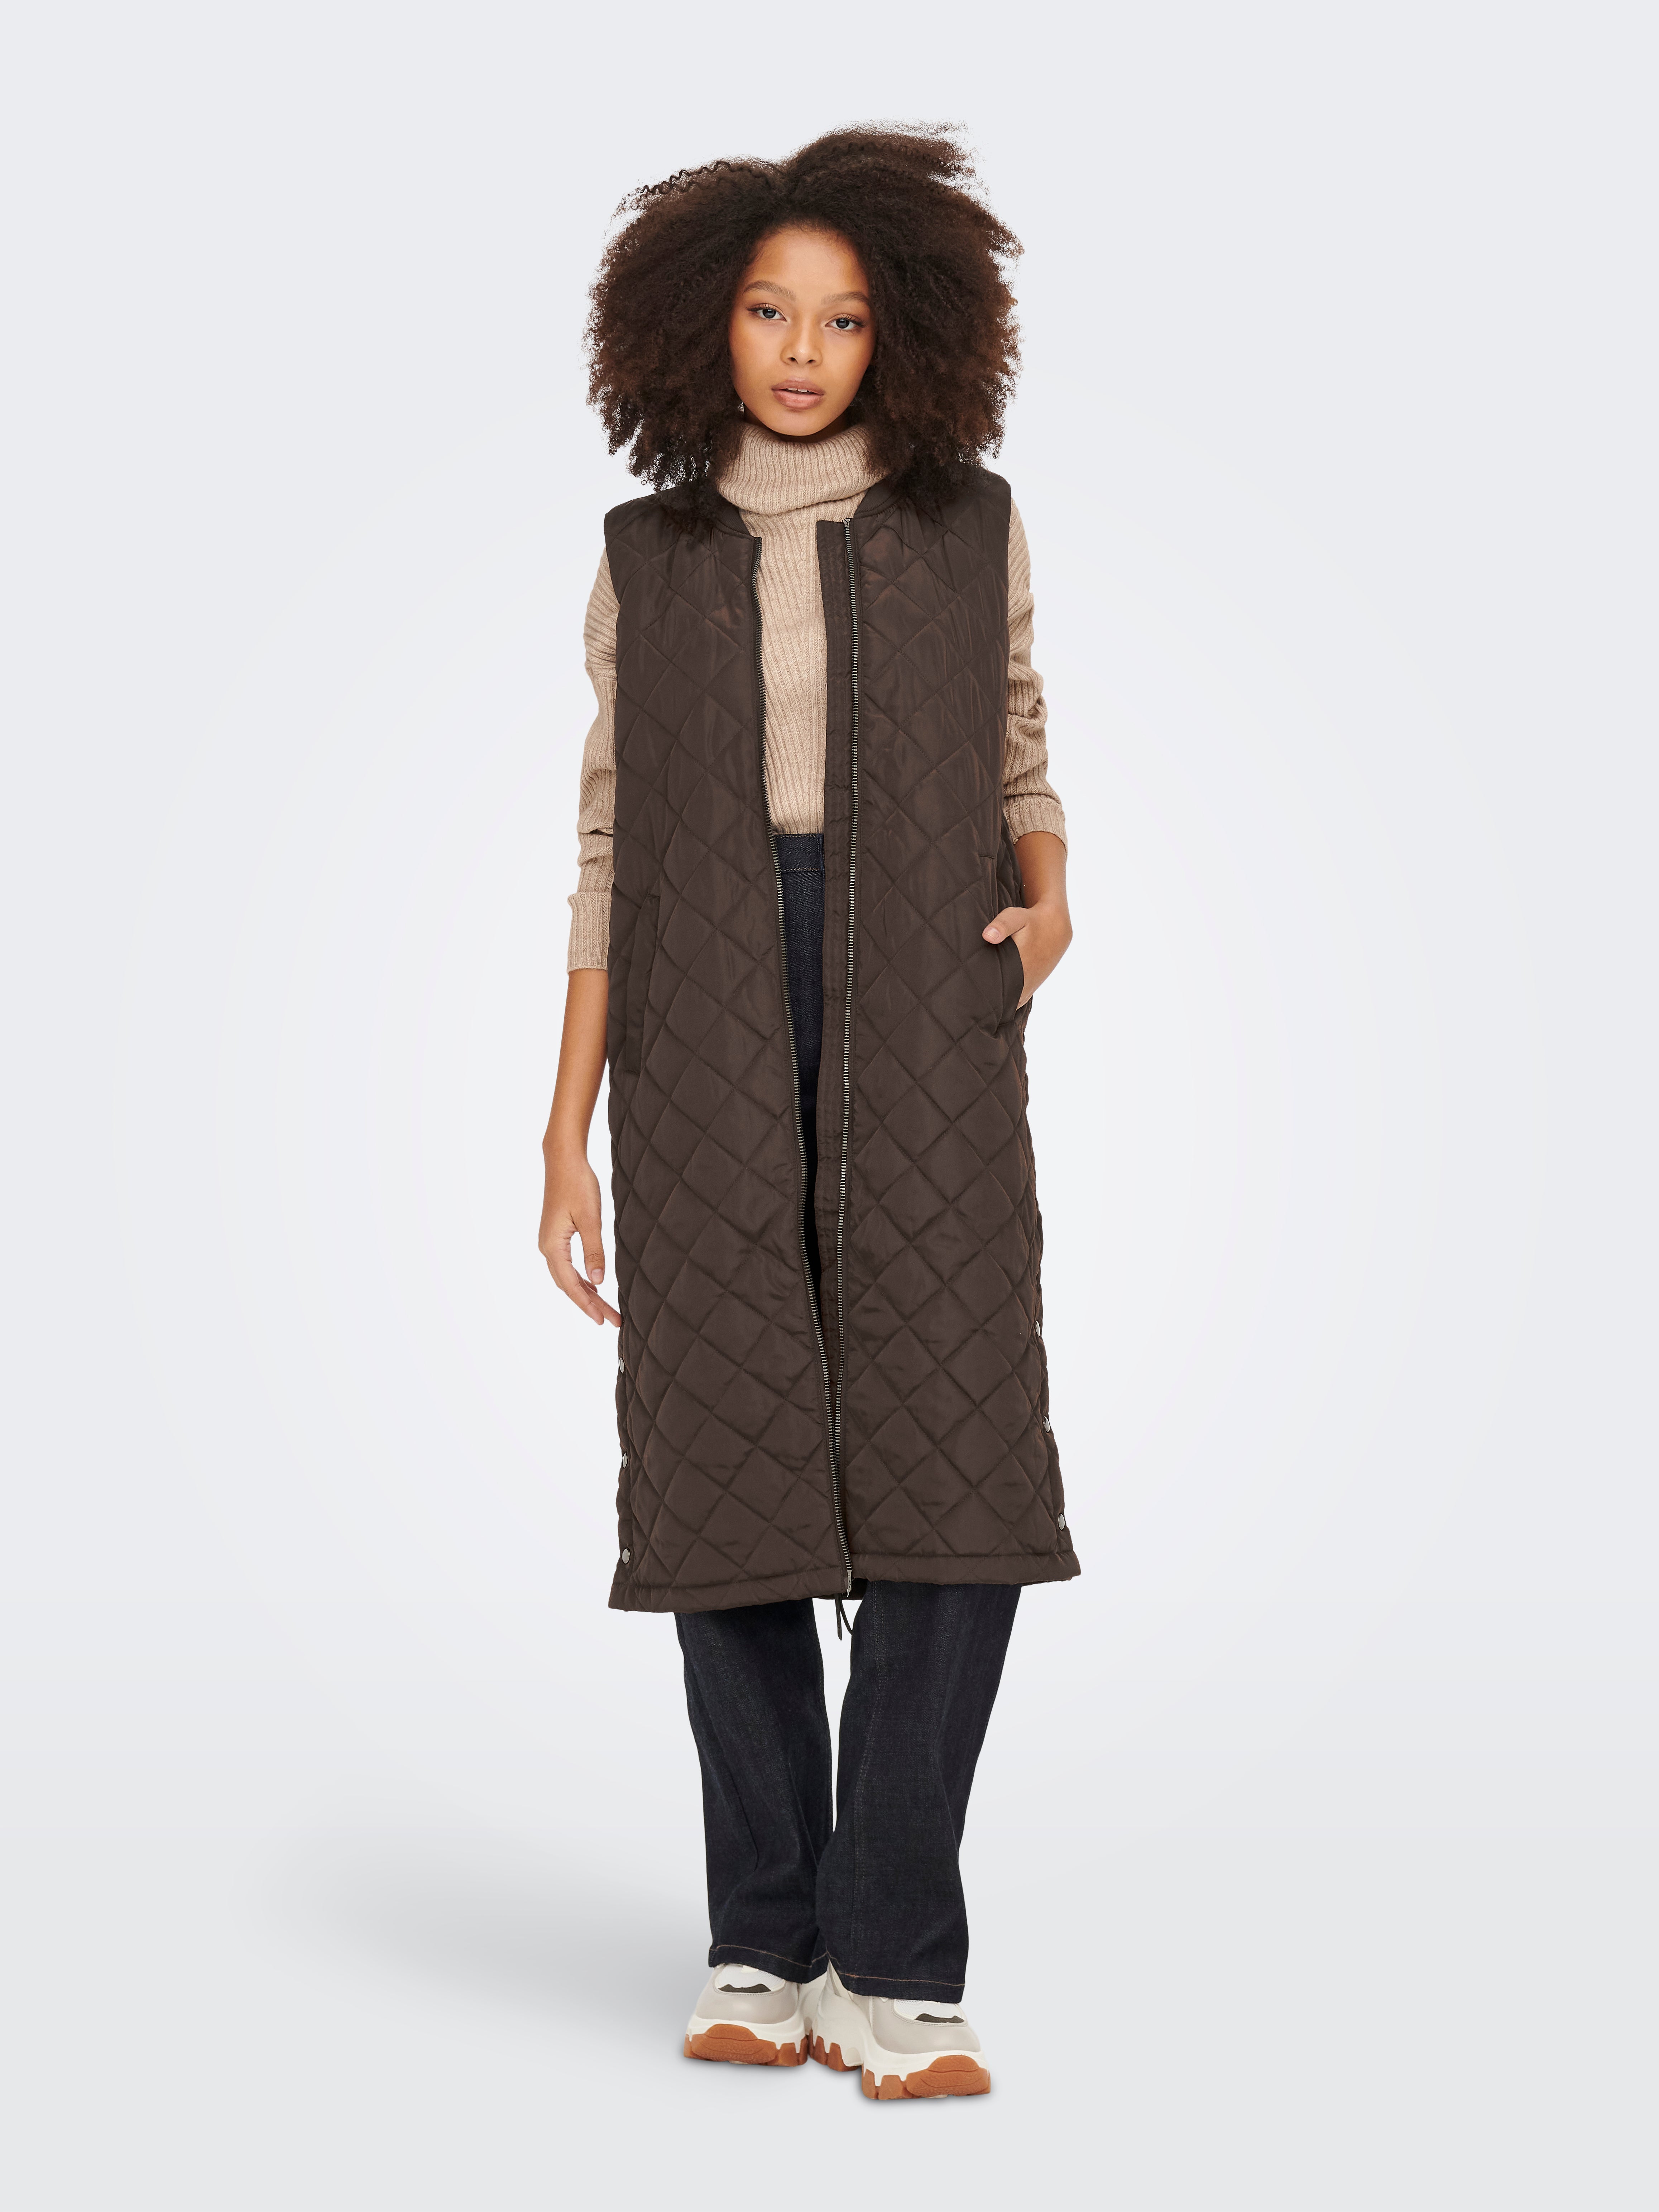 Something New Curve x Emilia Silberg Exclusive Leather Look Croc Trench Coat in Brown